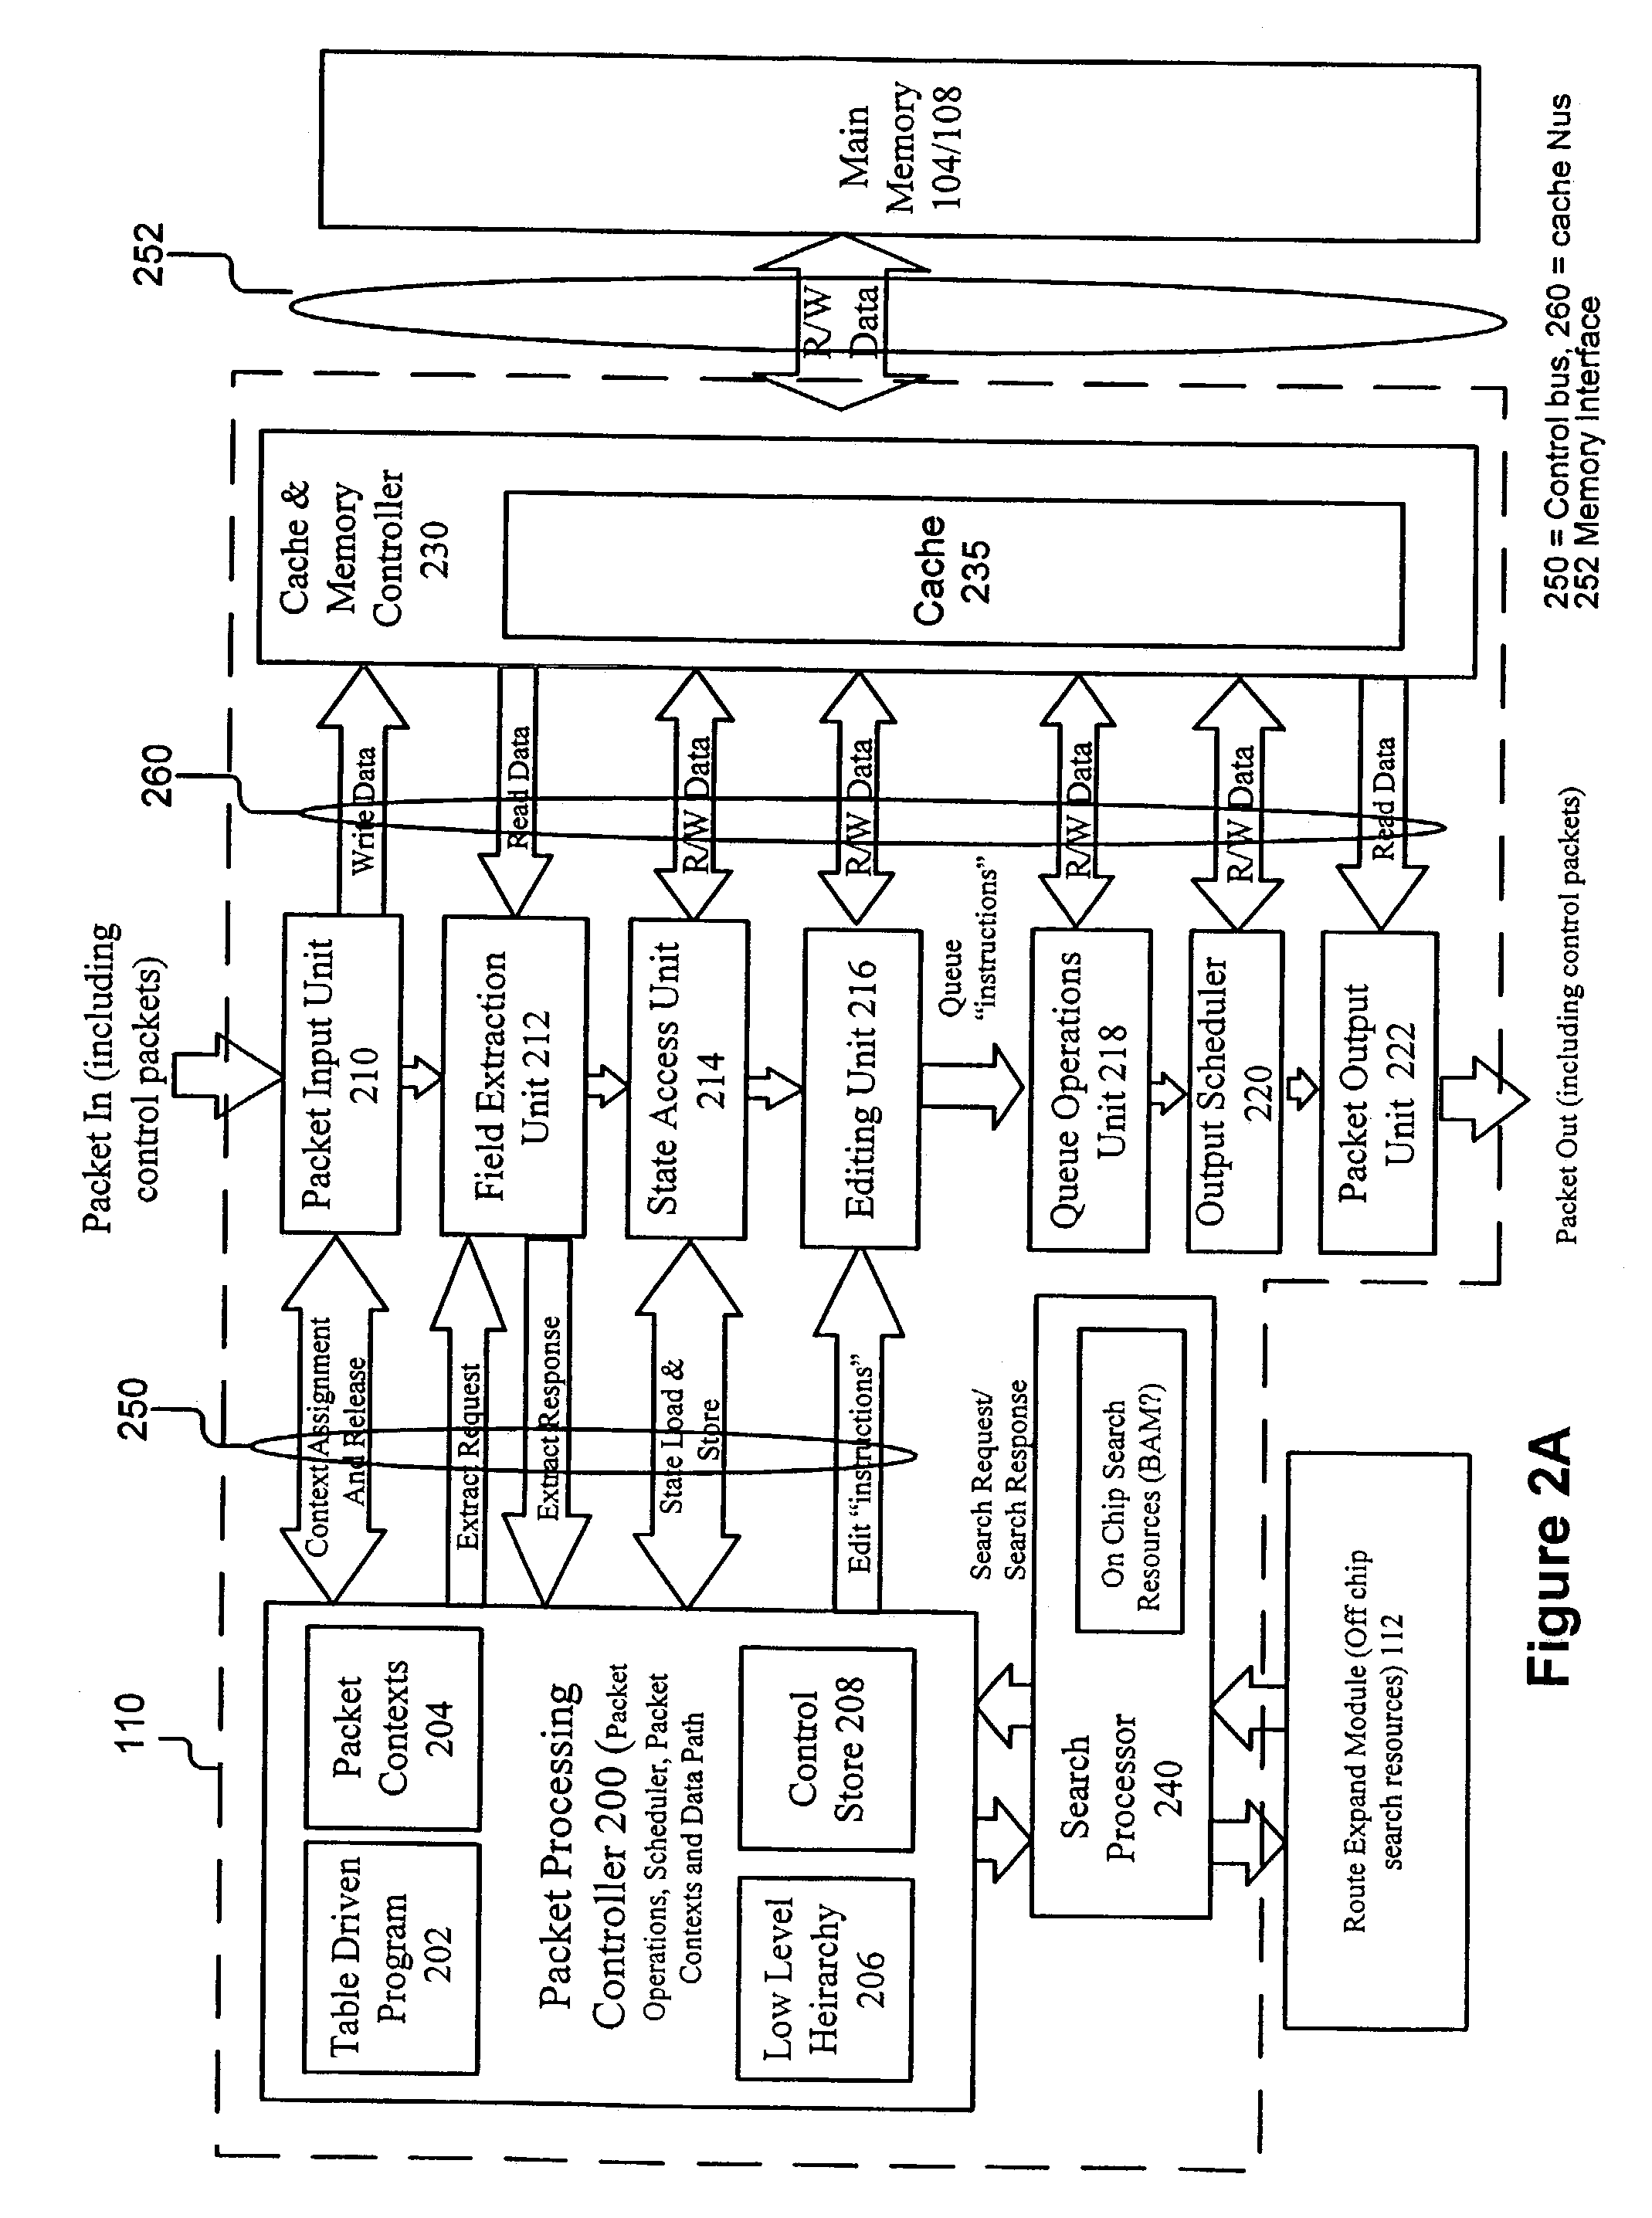 System and method for packet storage and retrieval